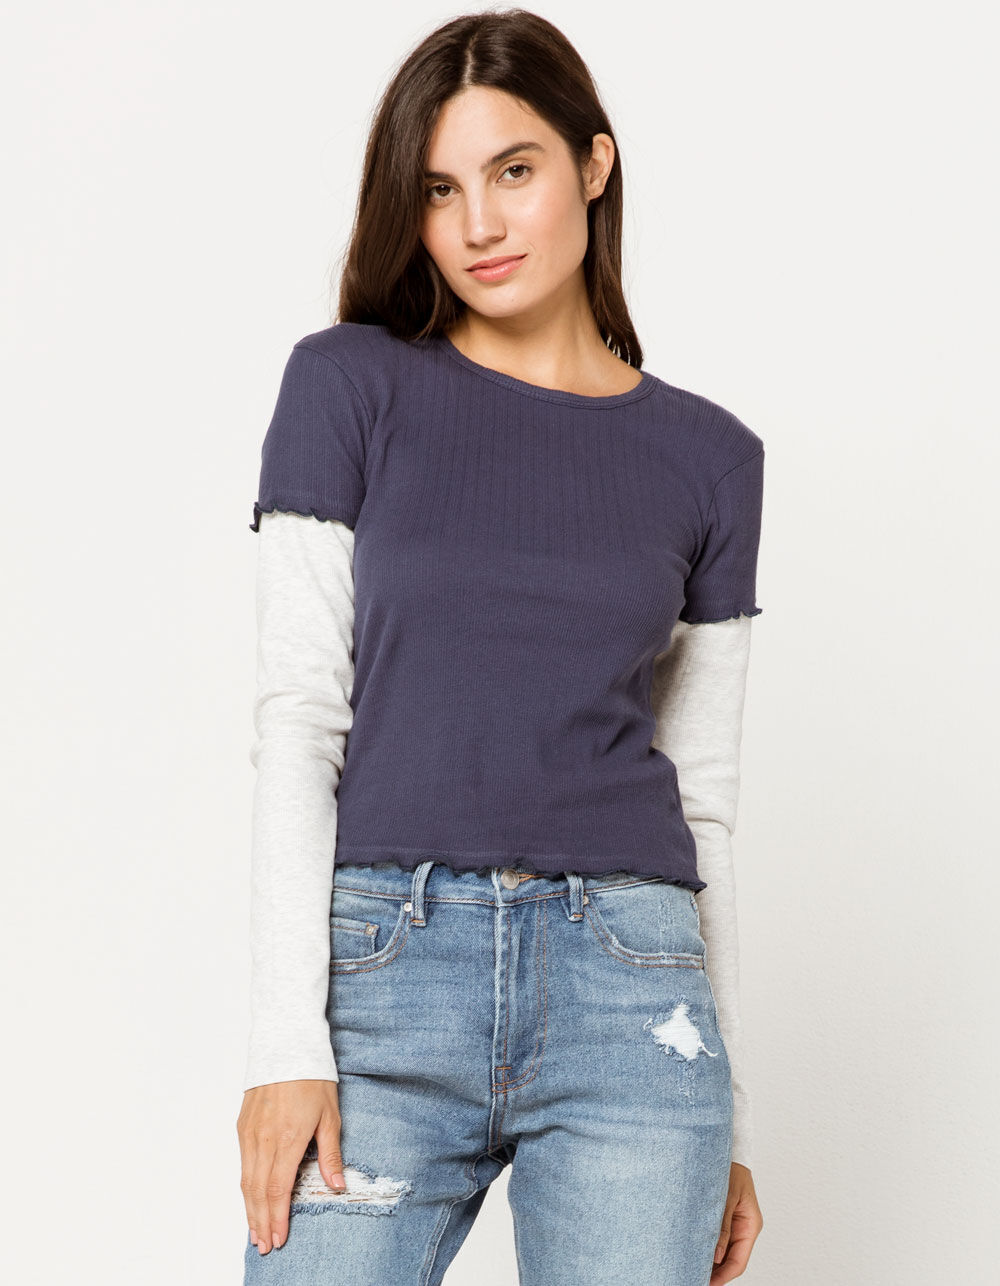 NIKXIE Solid 2-Fer Blue Womens Tee - BLUE COMBO | Tillys